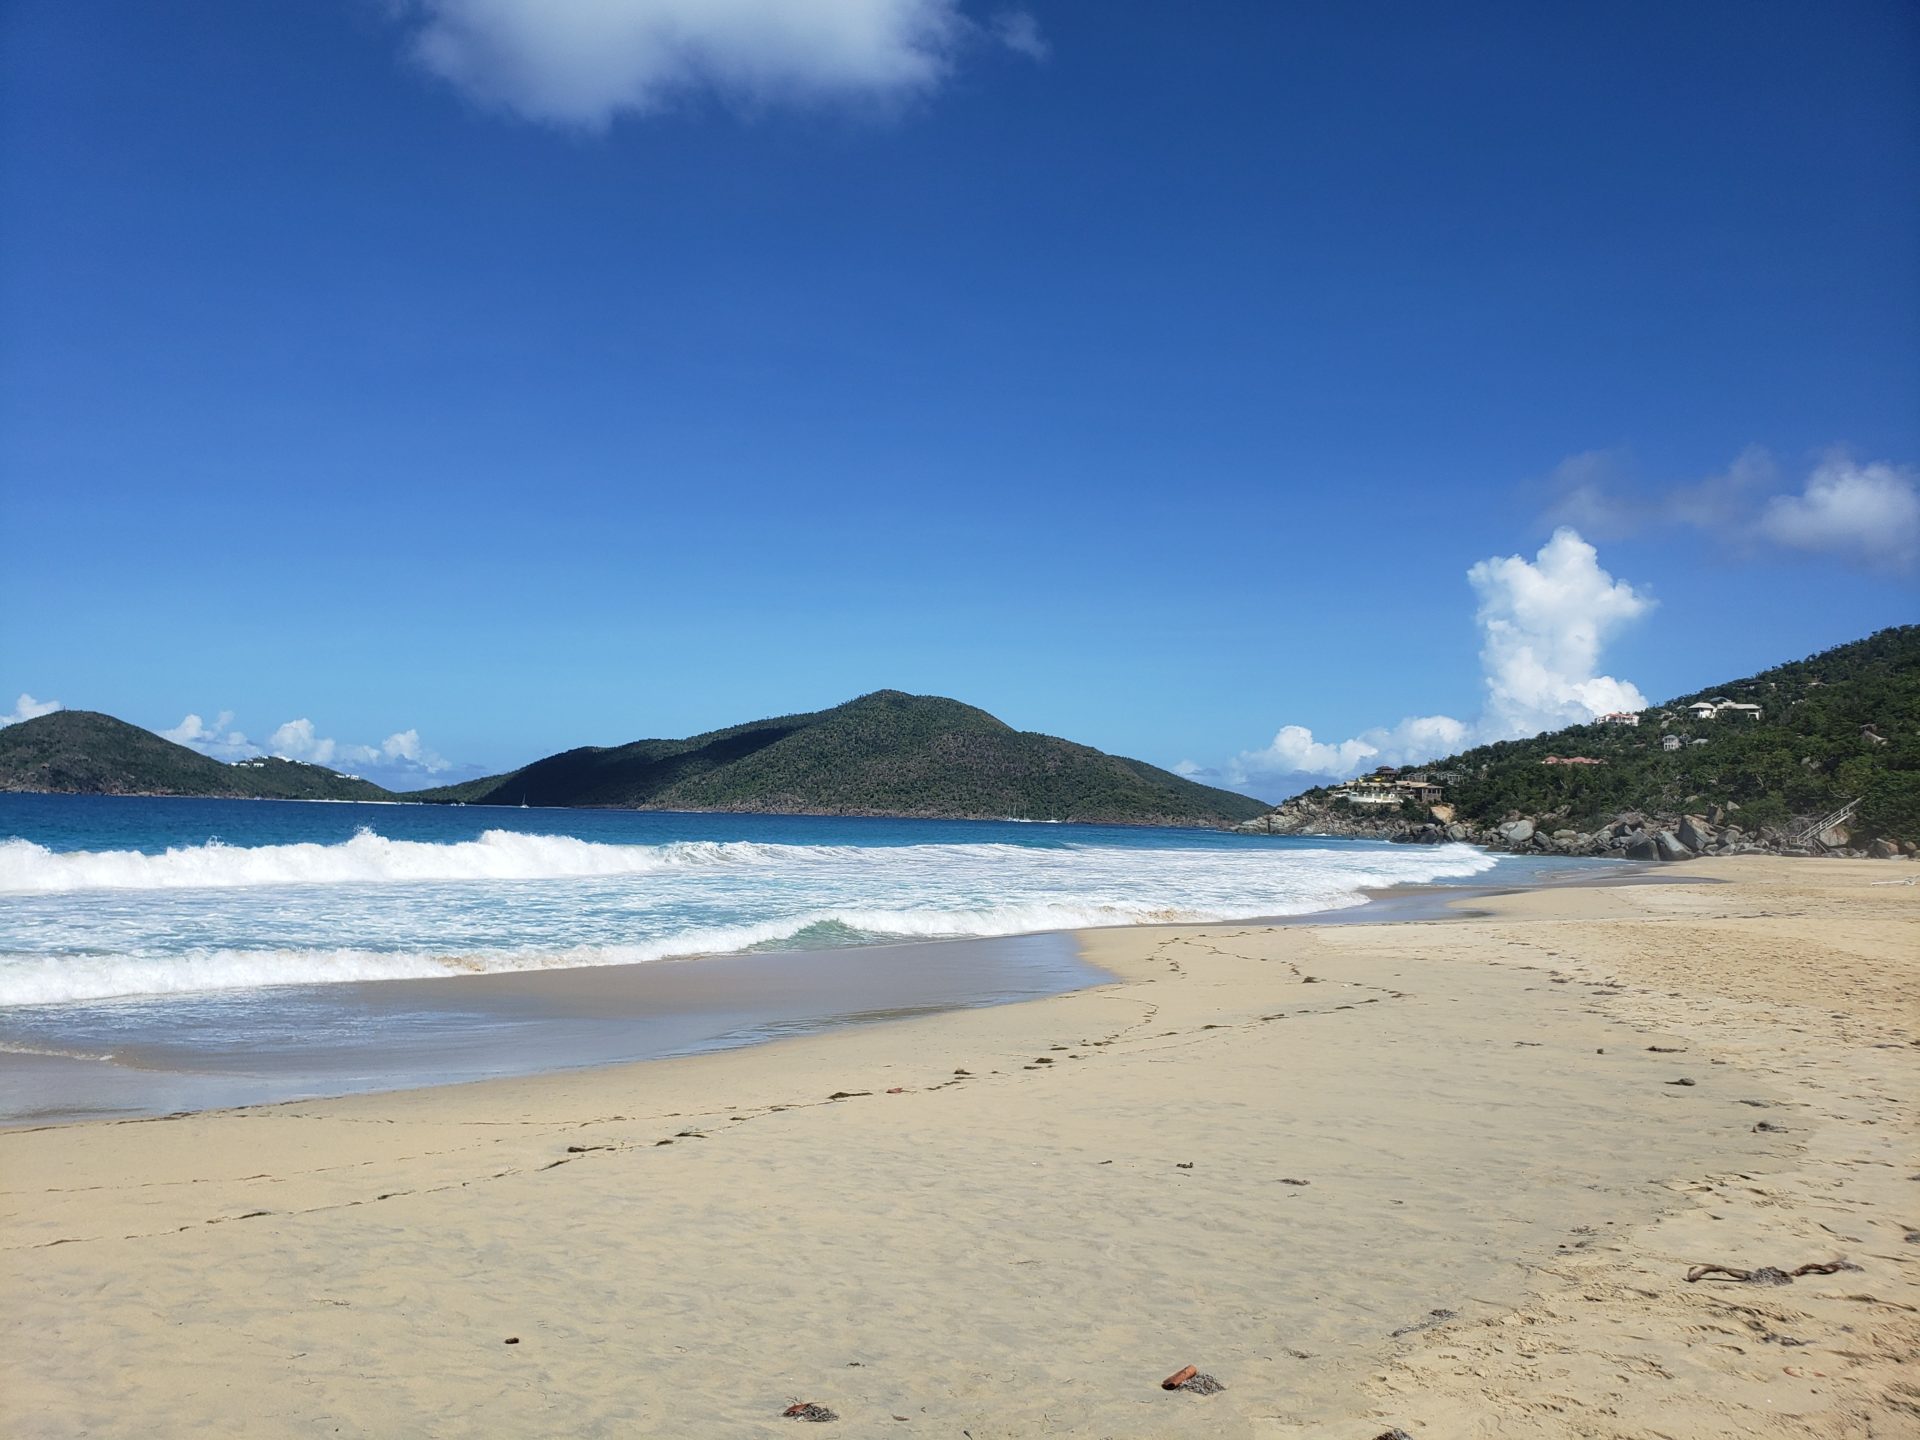 a beach with waves and hills in the background